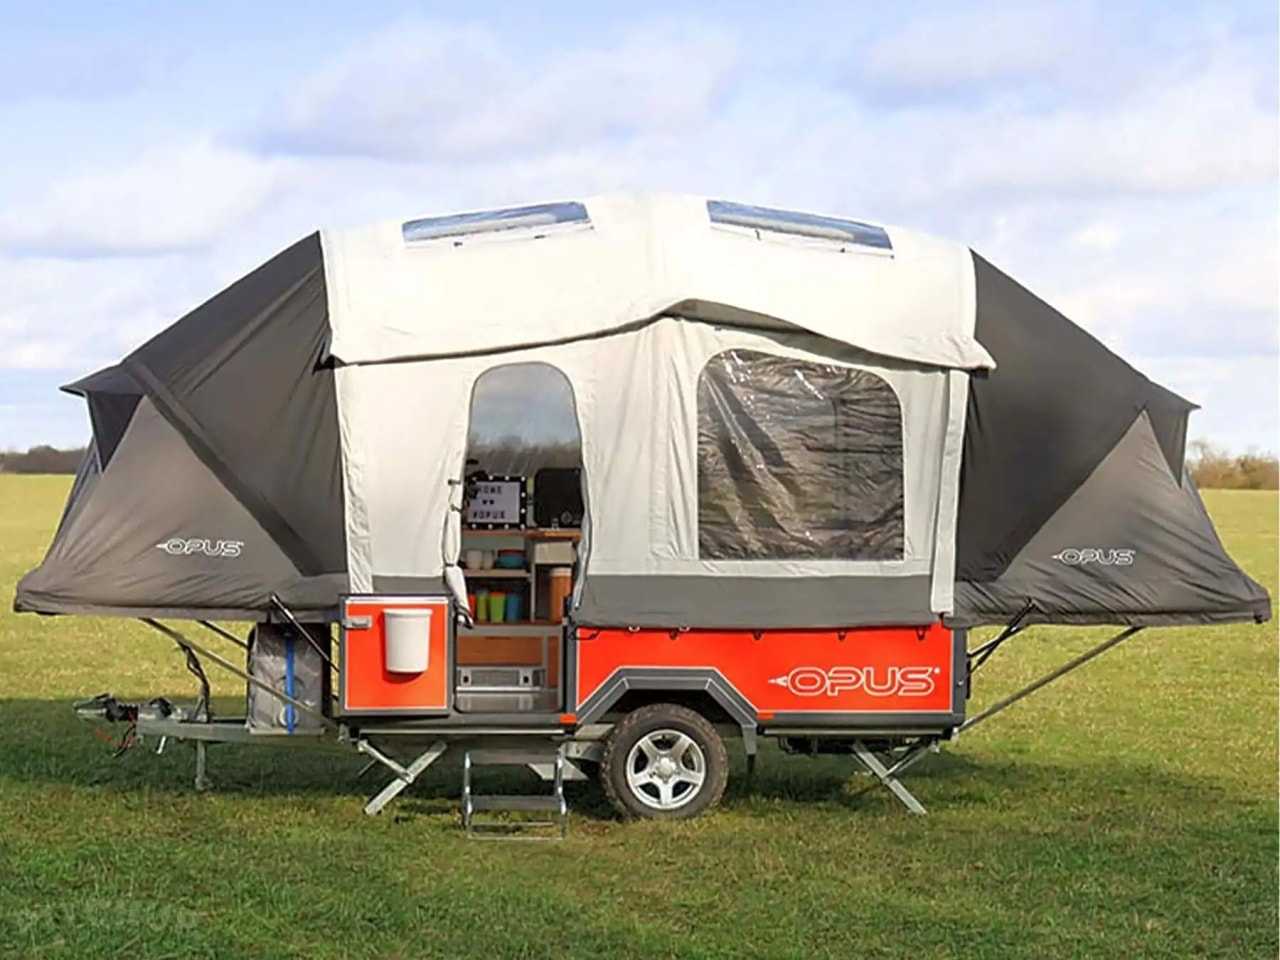 A trailer tent is a convenient all-in-one solution that’s easy to transport and set up